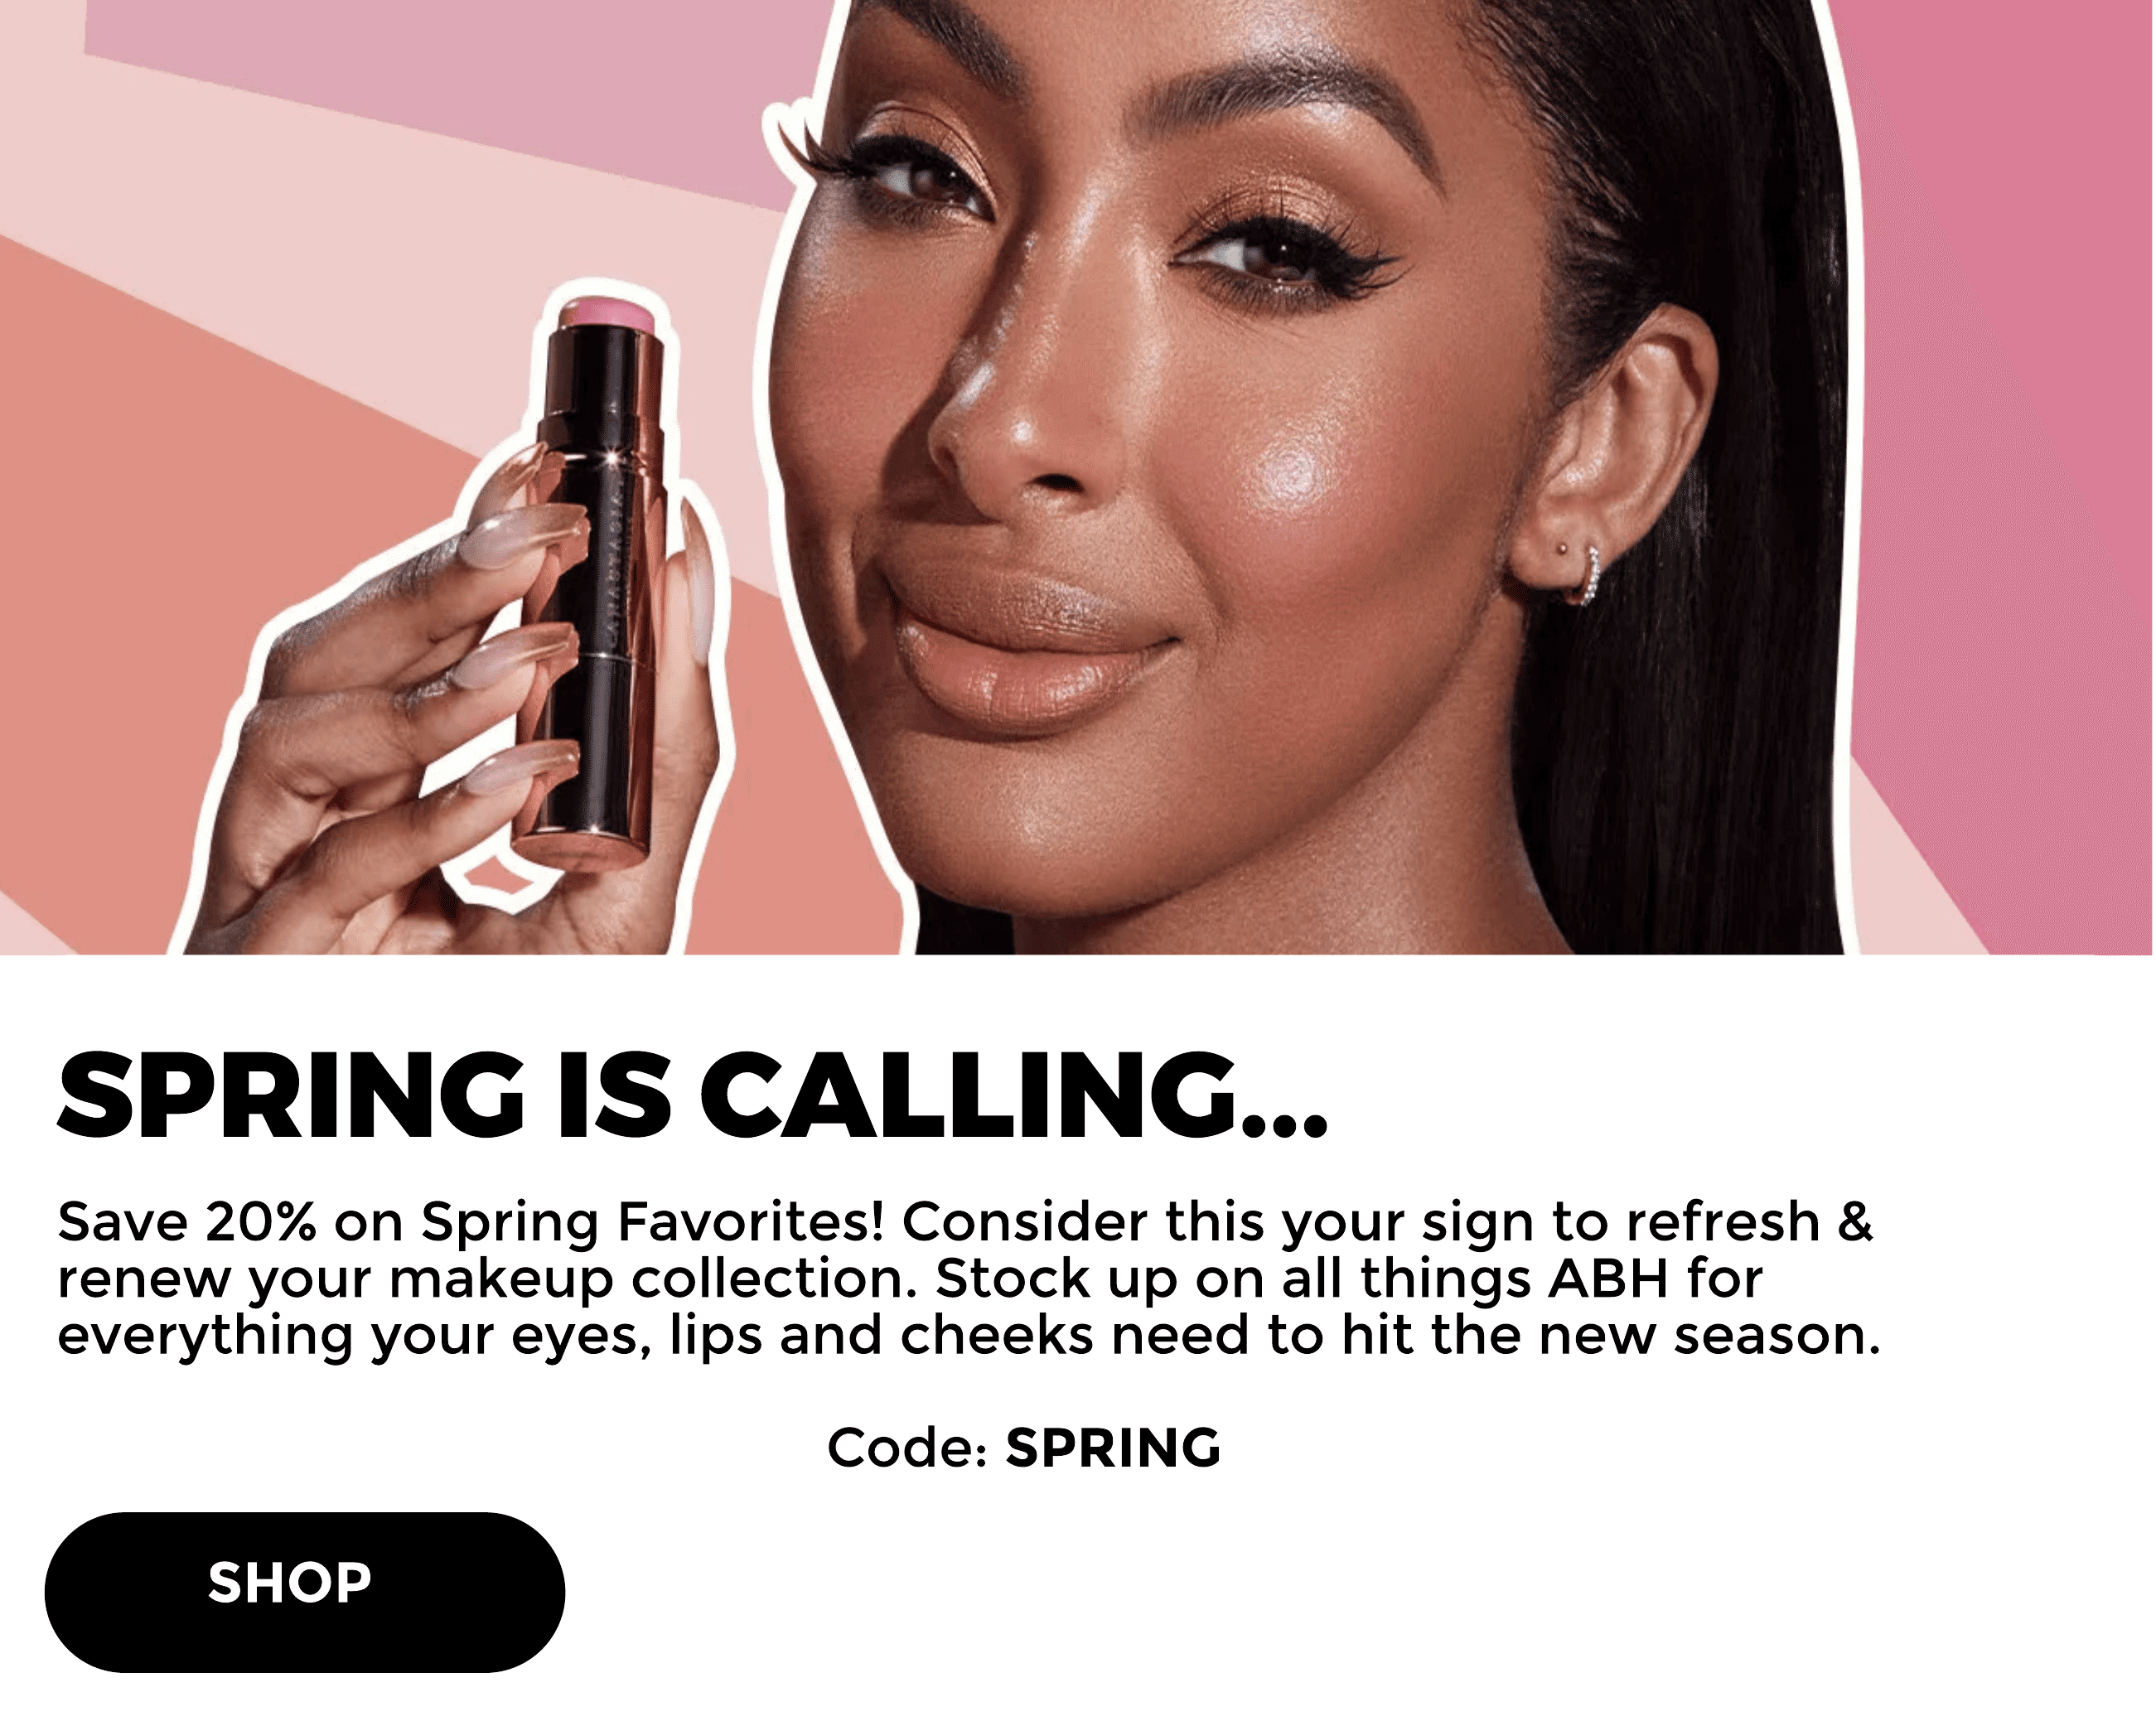 Consider this your sign to refresh & renew your makeup collection for Spring. Stock up on all things  ABH for everything your eyes, lips and cheeks need to hit the new season.